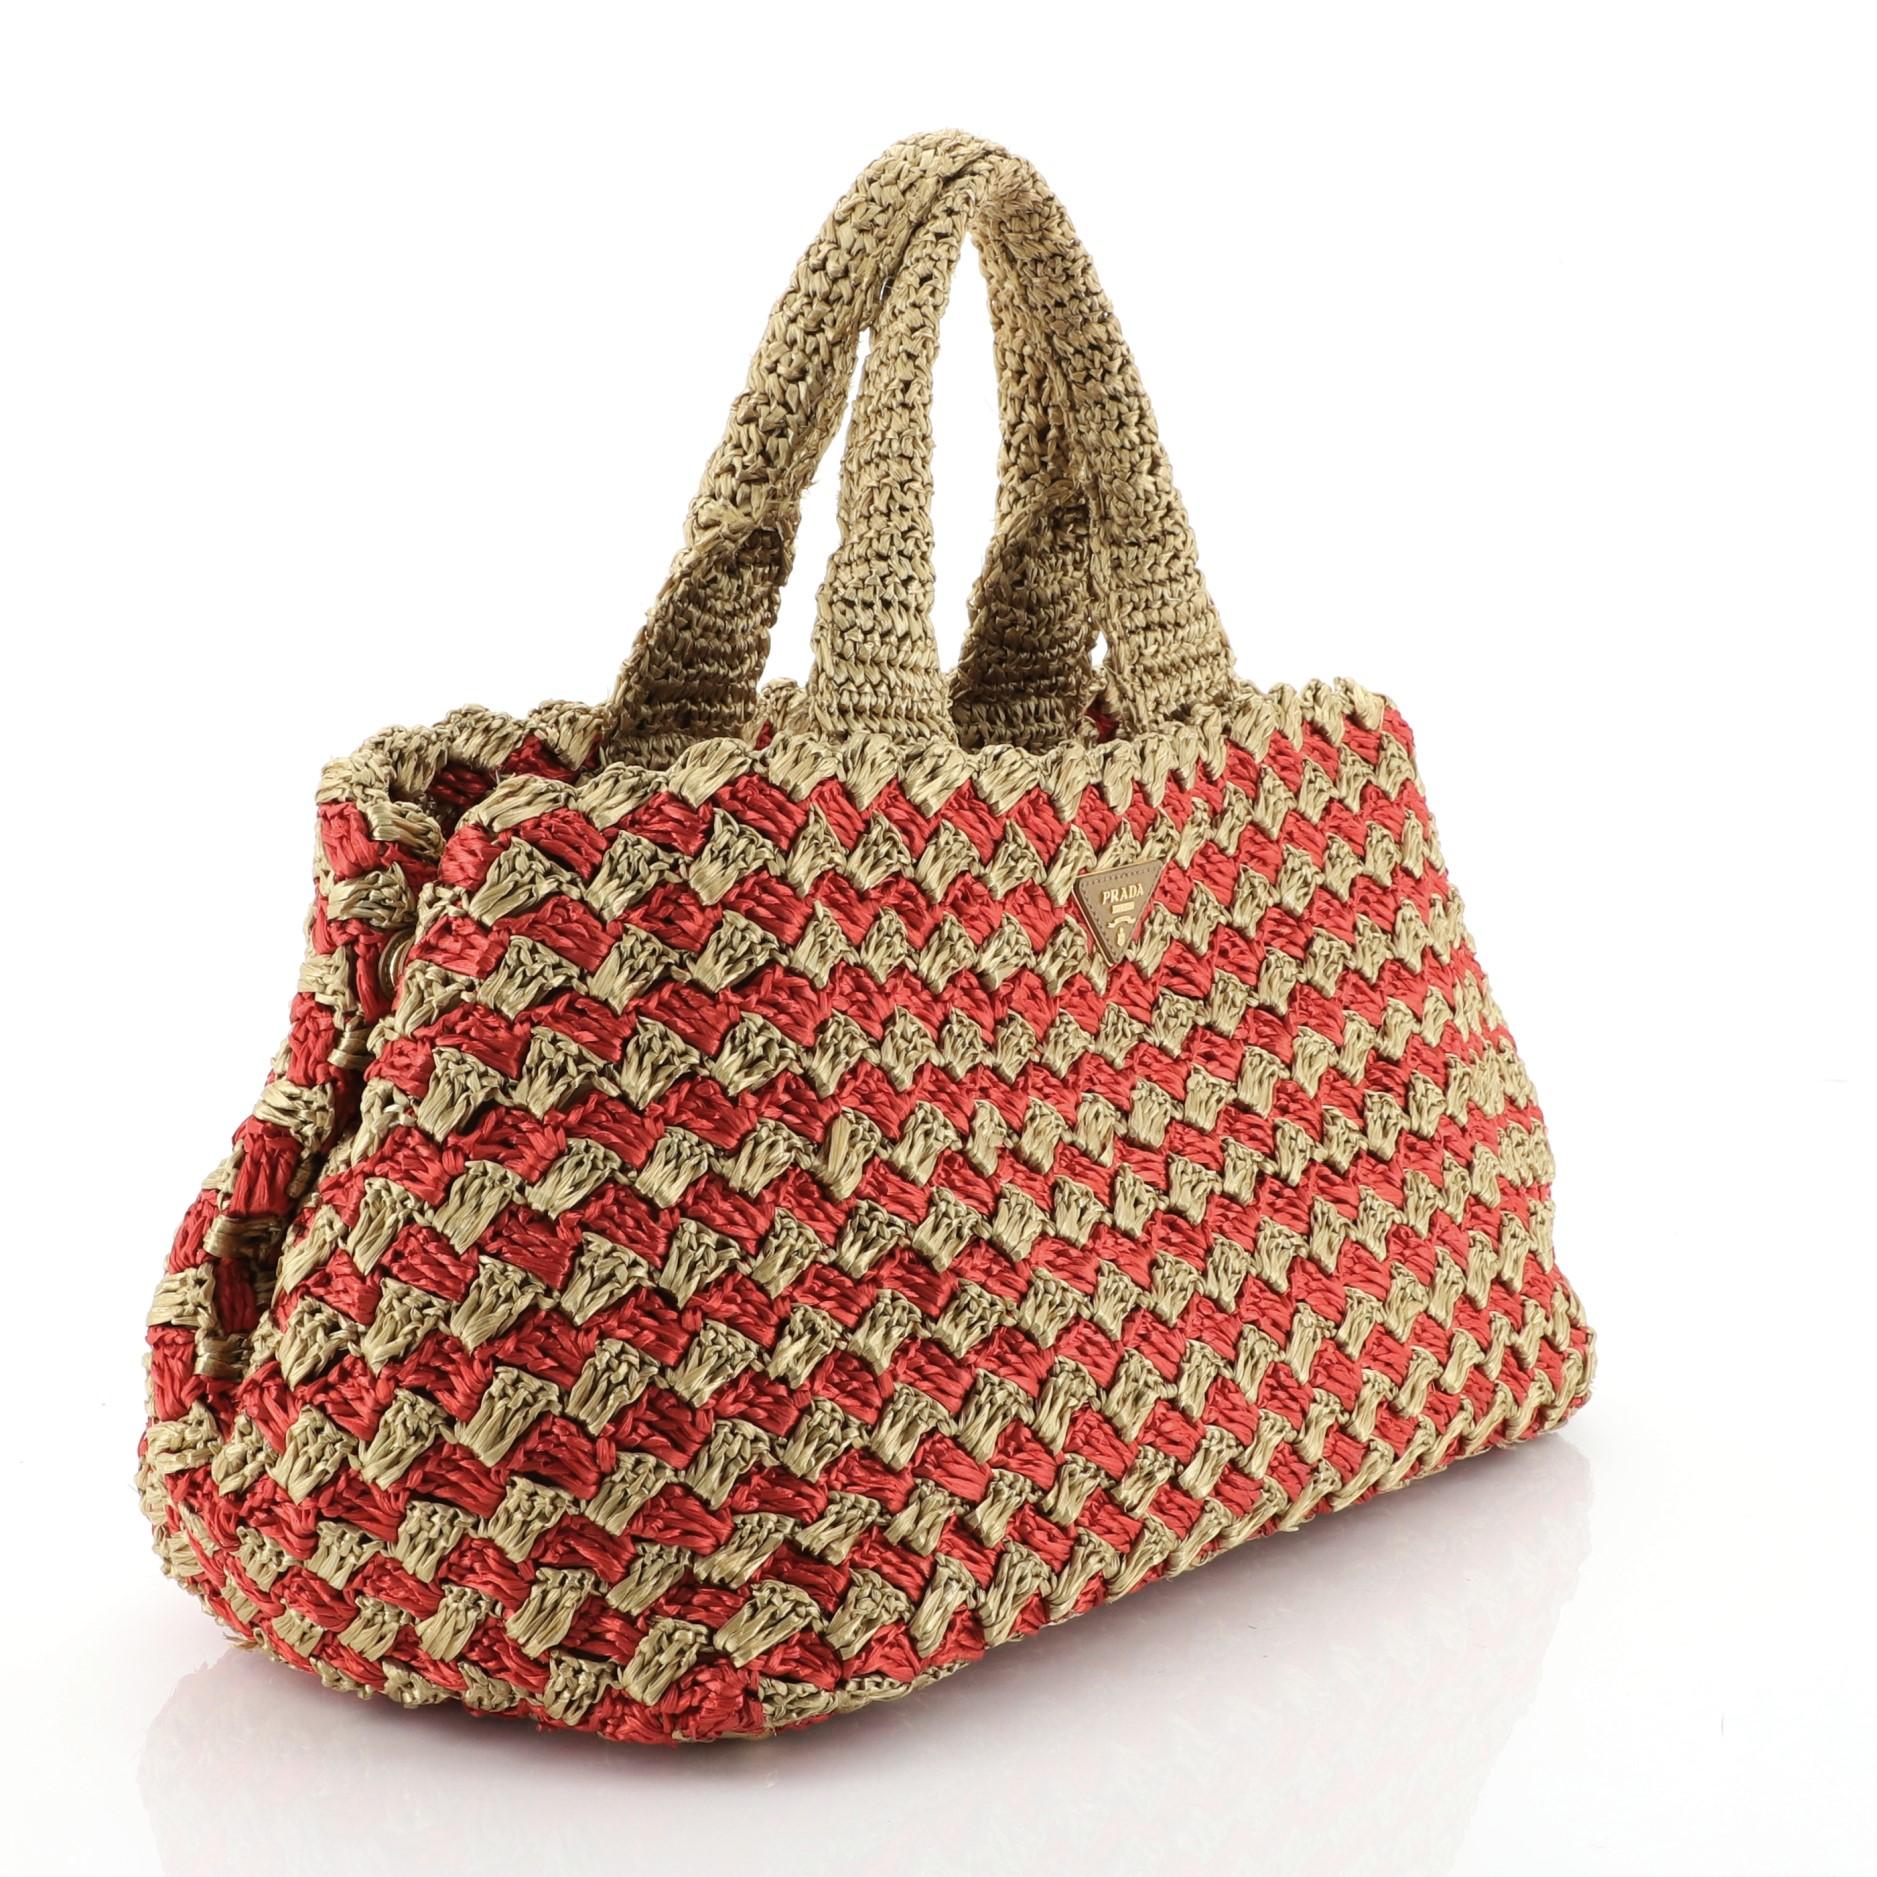 This Prada Canapa Tote Straw Medium, crafted in red and gold straw, features dual top handles and gold-tone hardware. It opens to a red fabric interior. 

Estimated Retail Price: $1,100
Condition: Very good. Wear and fraying on base corners and